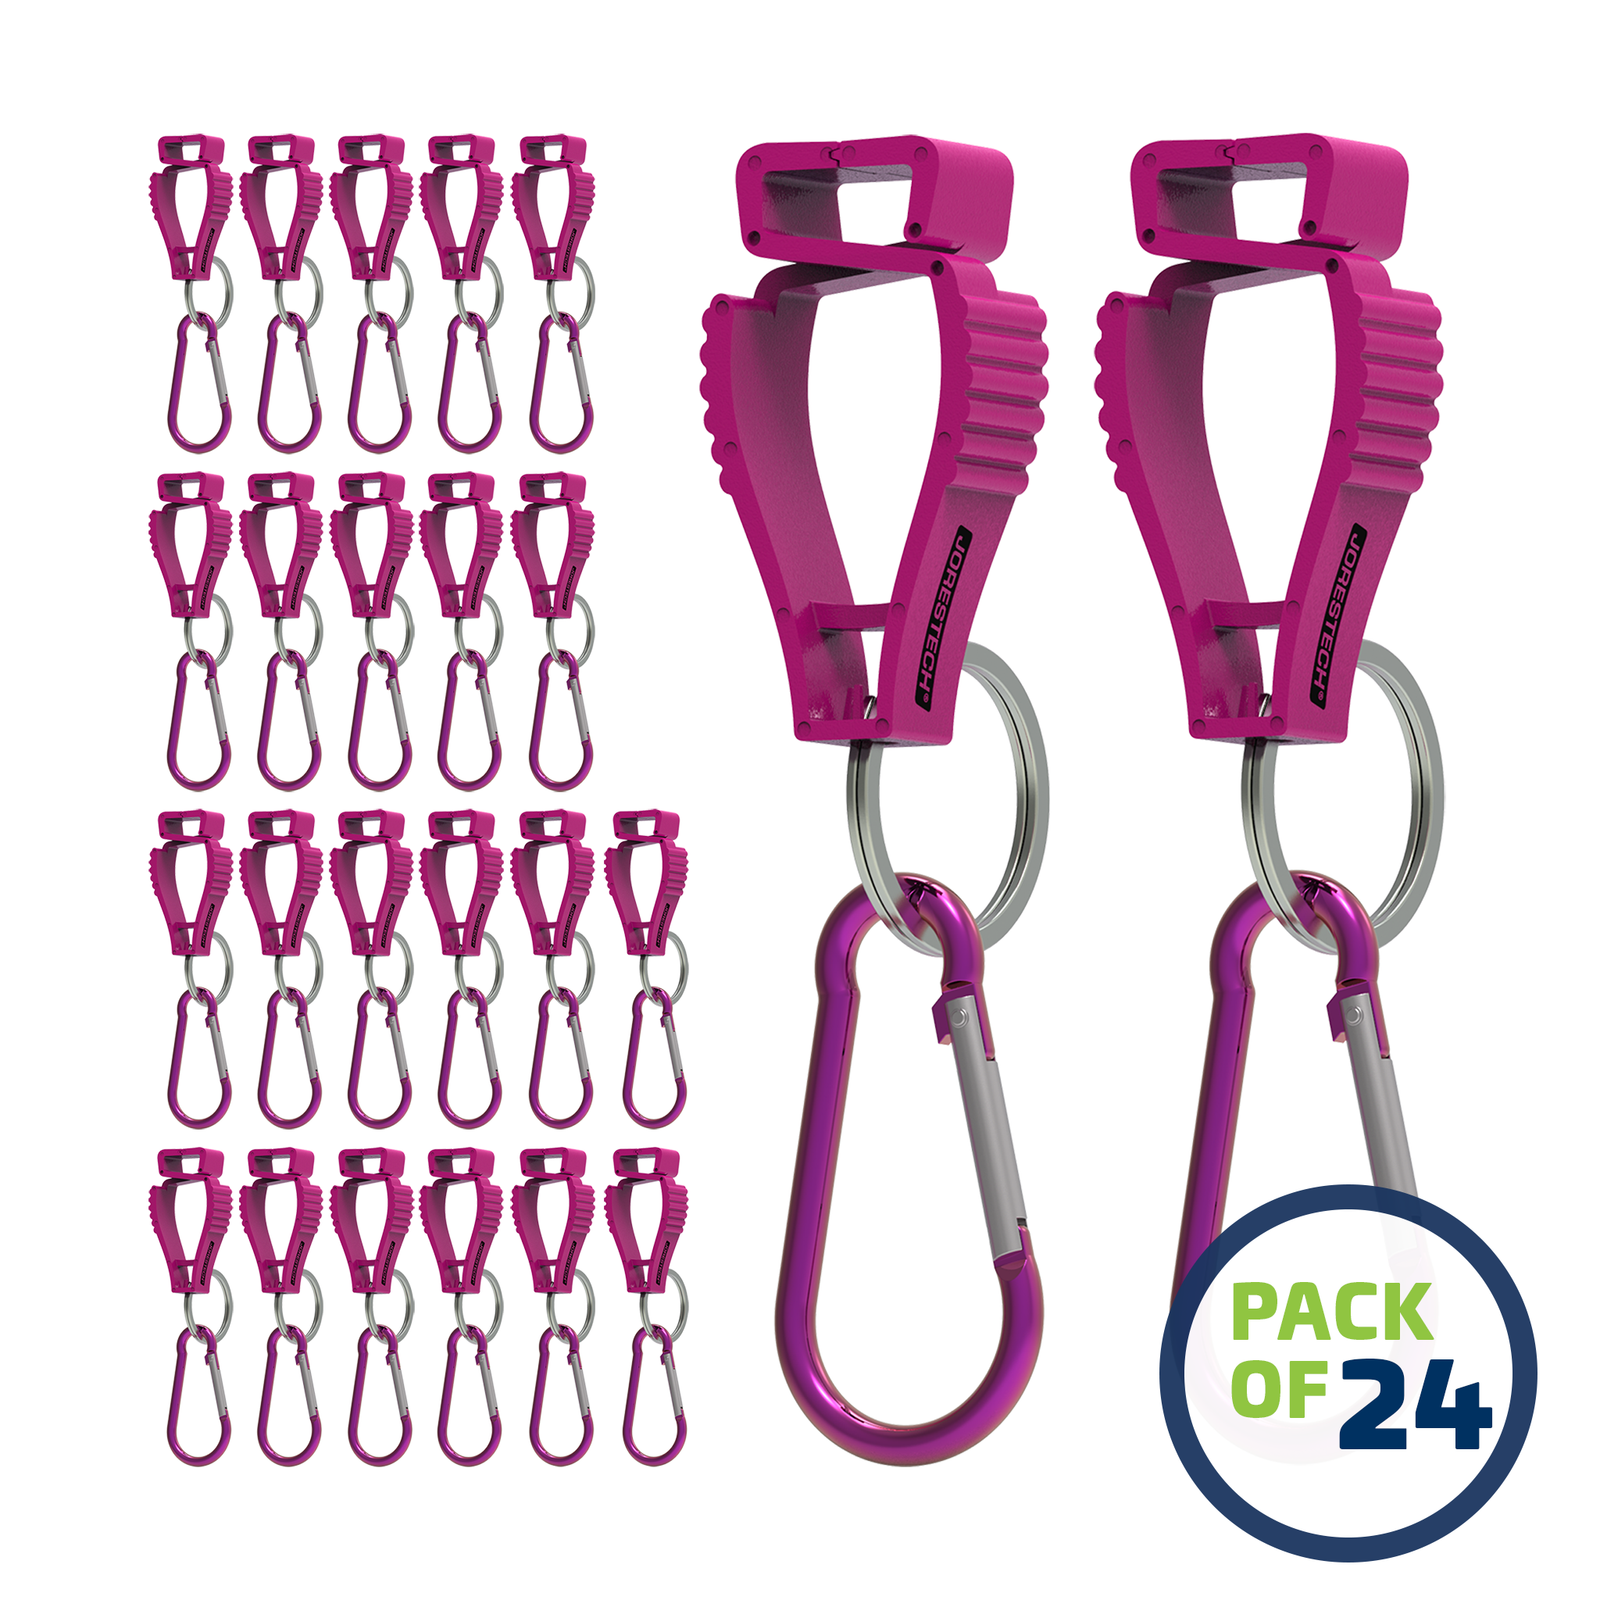 image of a pack of 24 Pink JORESTECH glove clip safety holders with carabiner over white background